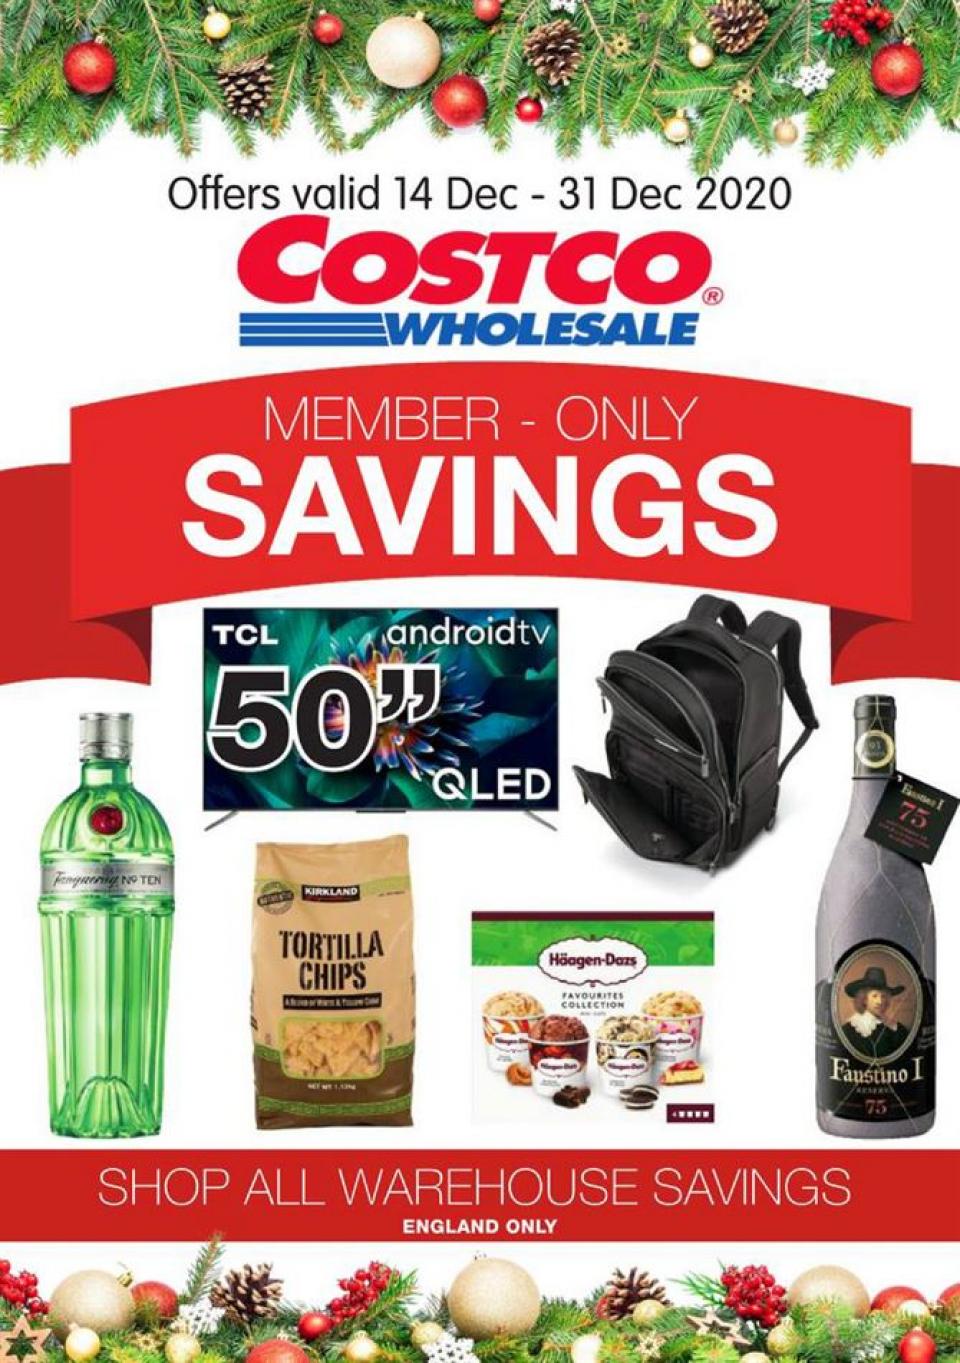 Costco Offers Member-Only Savings 14 December 2020